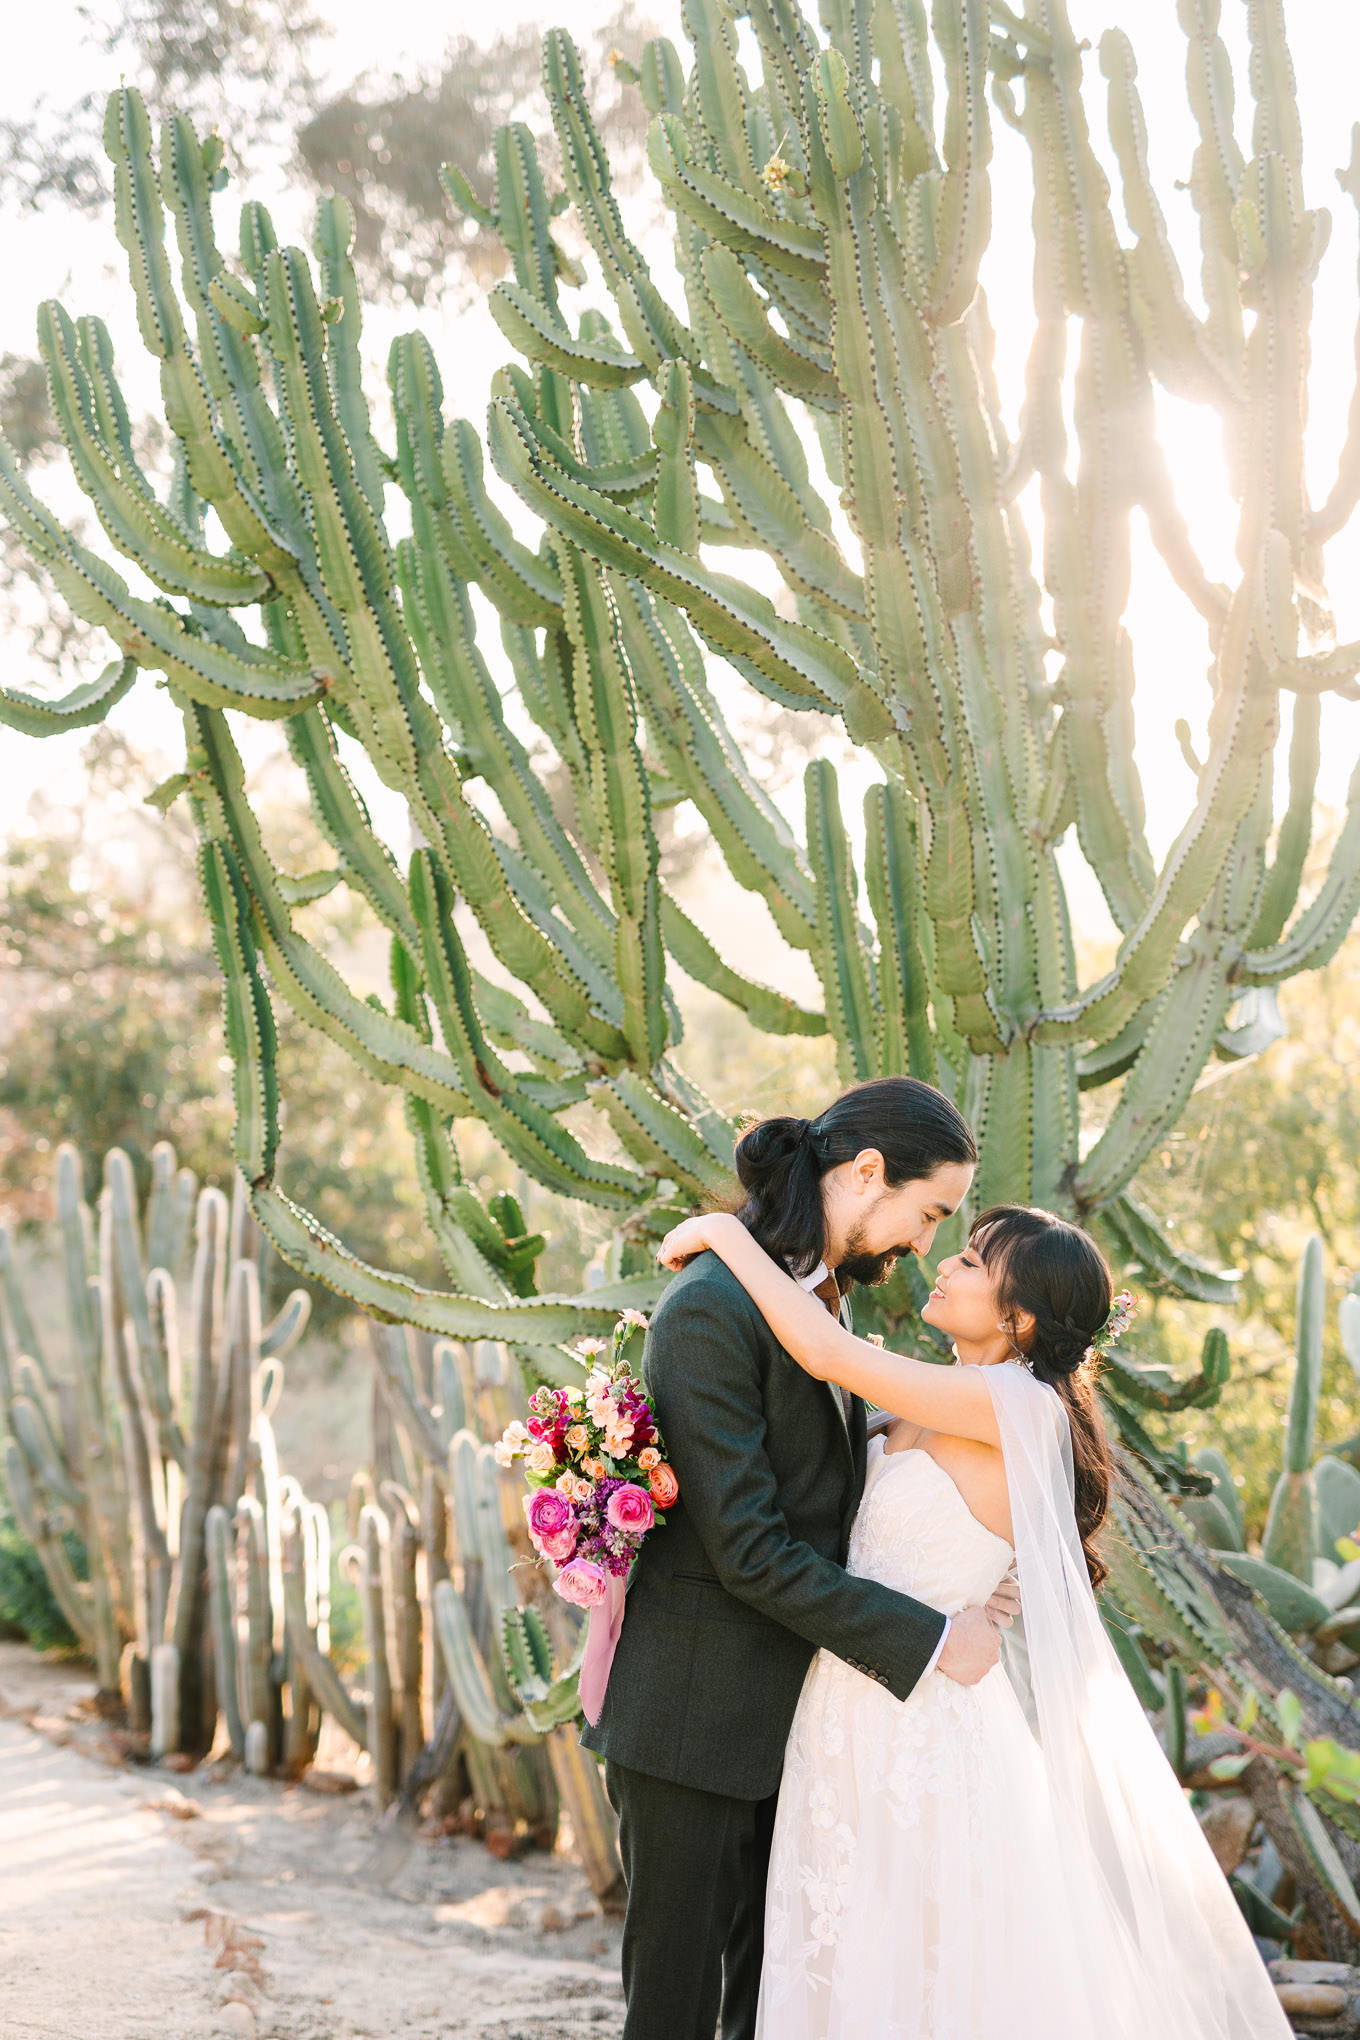 Balboa Park San Diego wedding session | Wedding and elopement photography roundup | Los Angeles and Palm Springs photographer | #losangeleswedding #palmspringswedding #elopementphotographer Source: Mary Costa Photography | Los Angeles